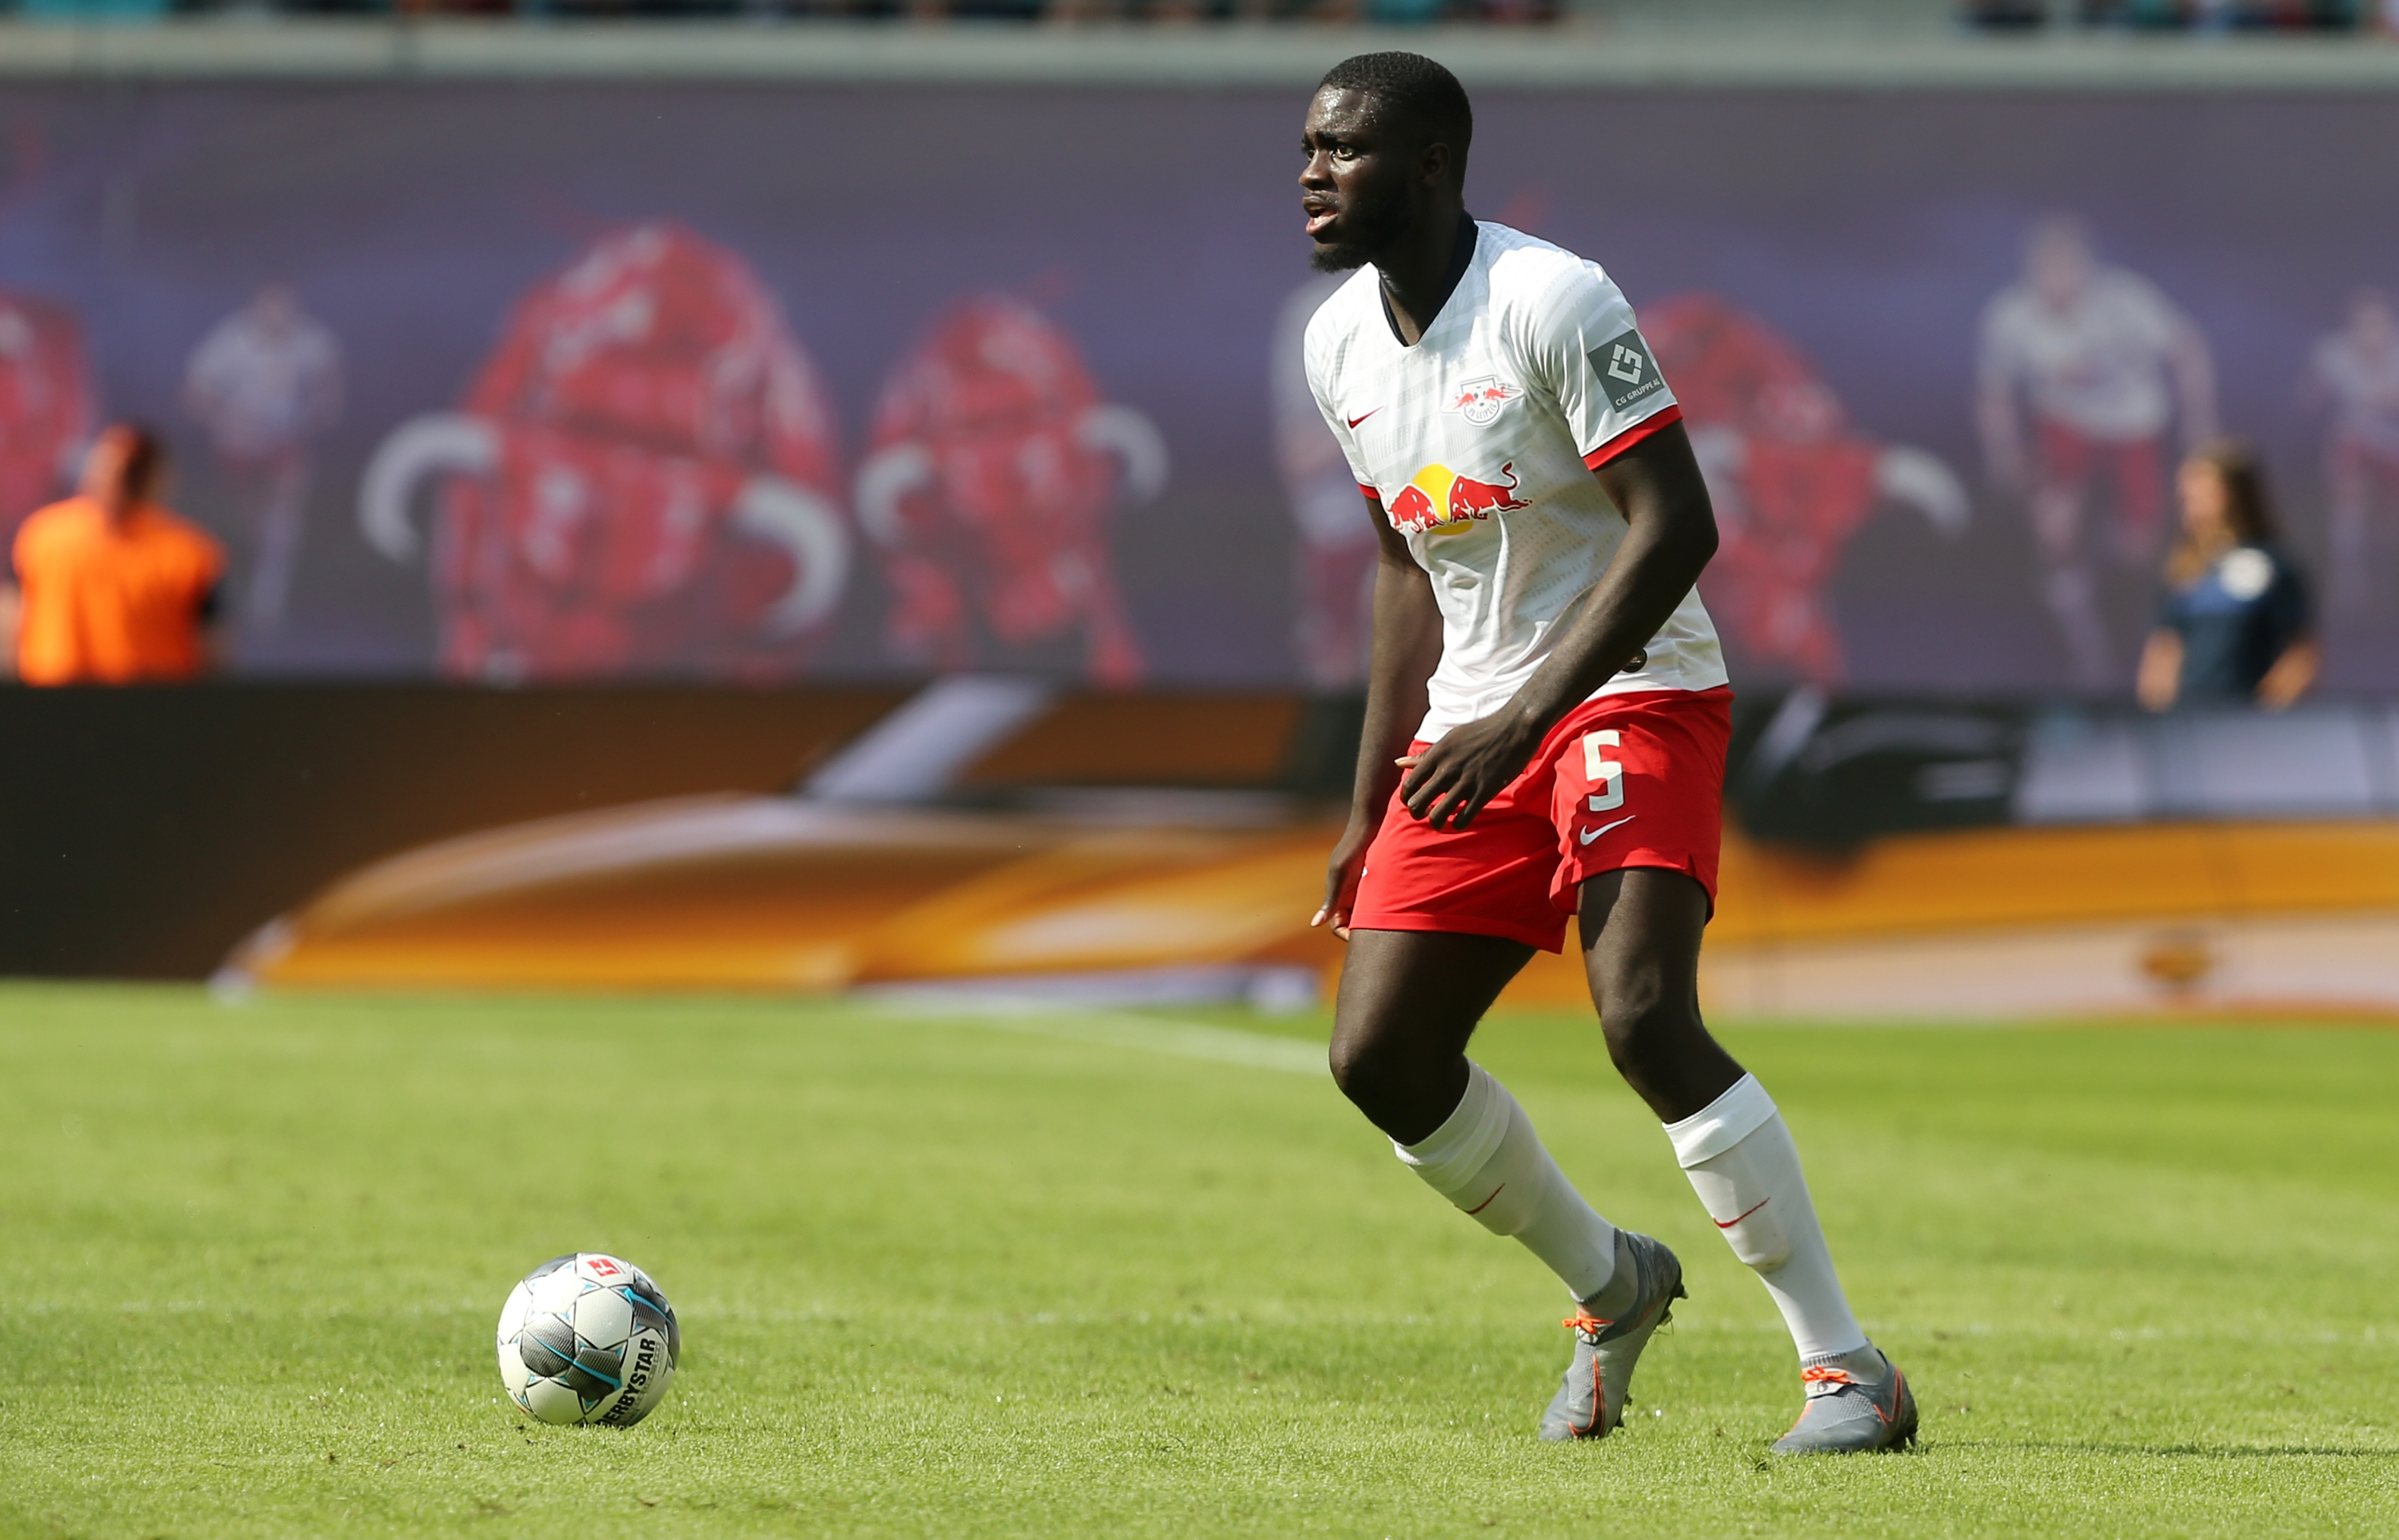 LEIPZIG, GERMANY - AUGUST 03:  Dayot Upamecano of Leipzig runs with the ball during the pre-season friendly match between RB Leipzig and Aston Villa at Red Bull Arena on August 3, 2019 in Leipzig, Germany.  (Photo by Matthias Kern/Bongarts/Getty Images)